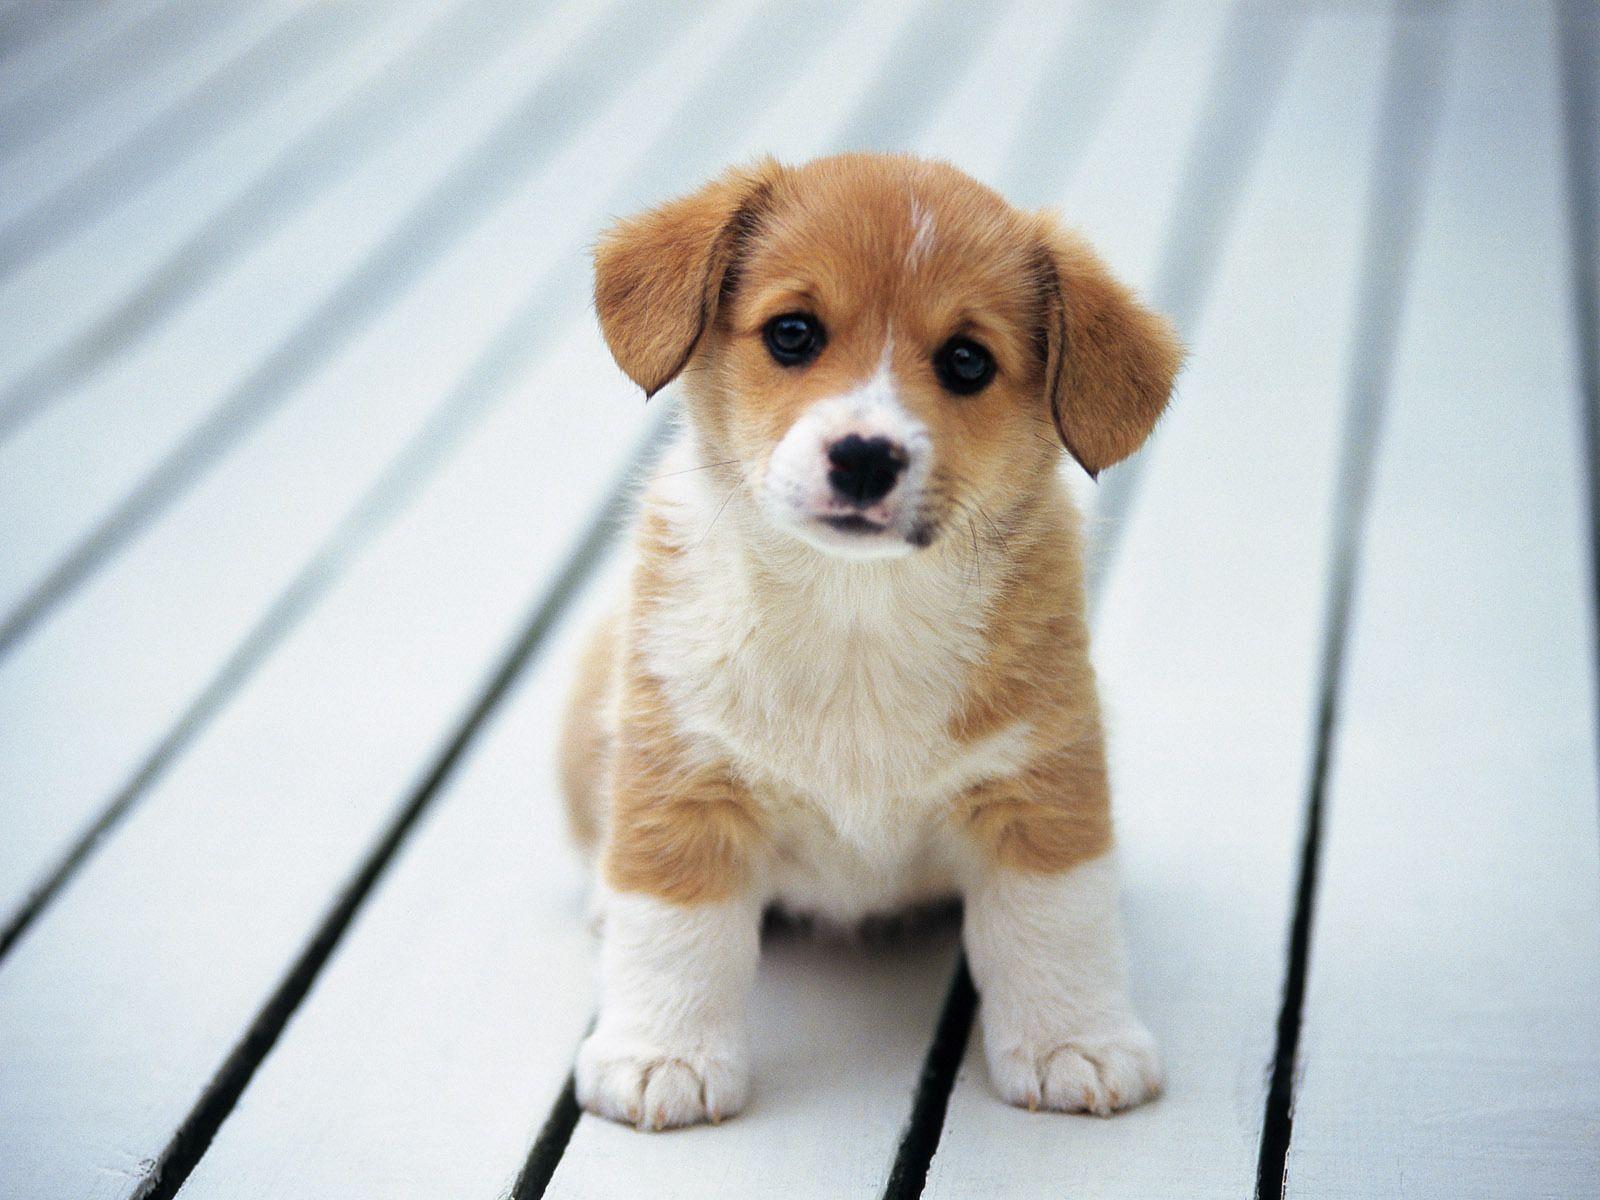 Collection of Puppies Wallpaper on HDWallpaper